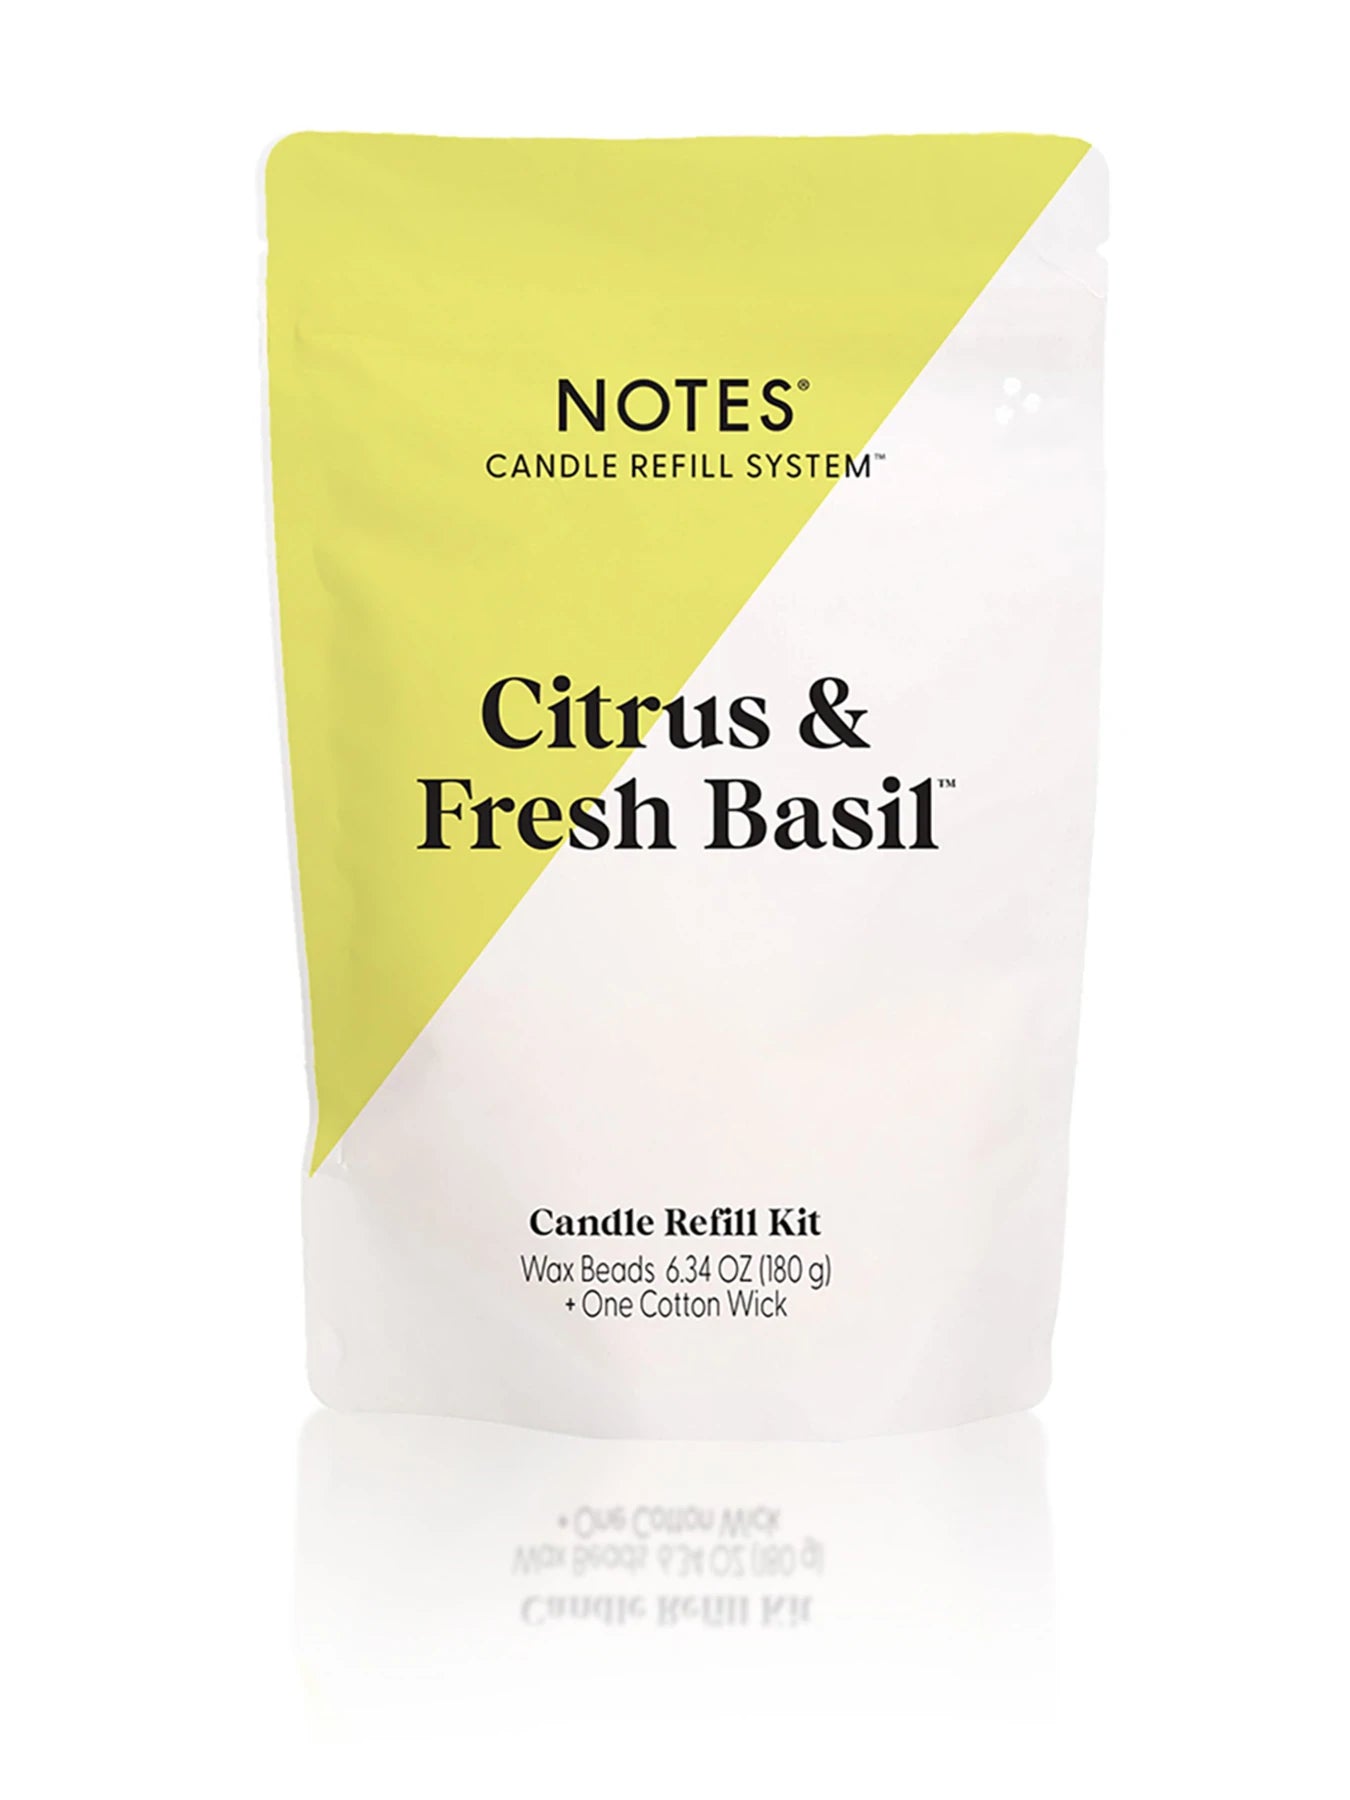 NOTES® Candle Refill Kits